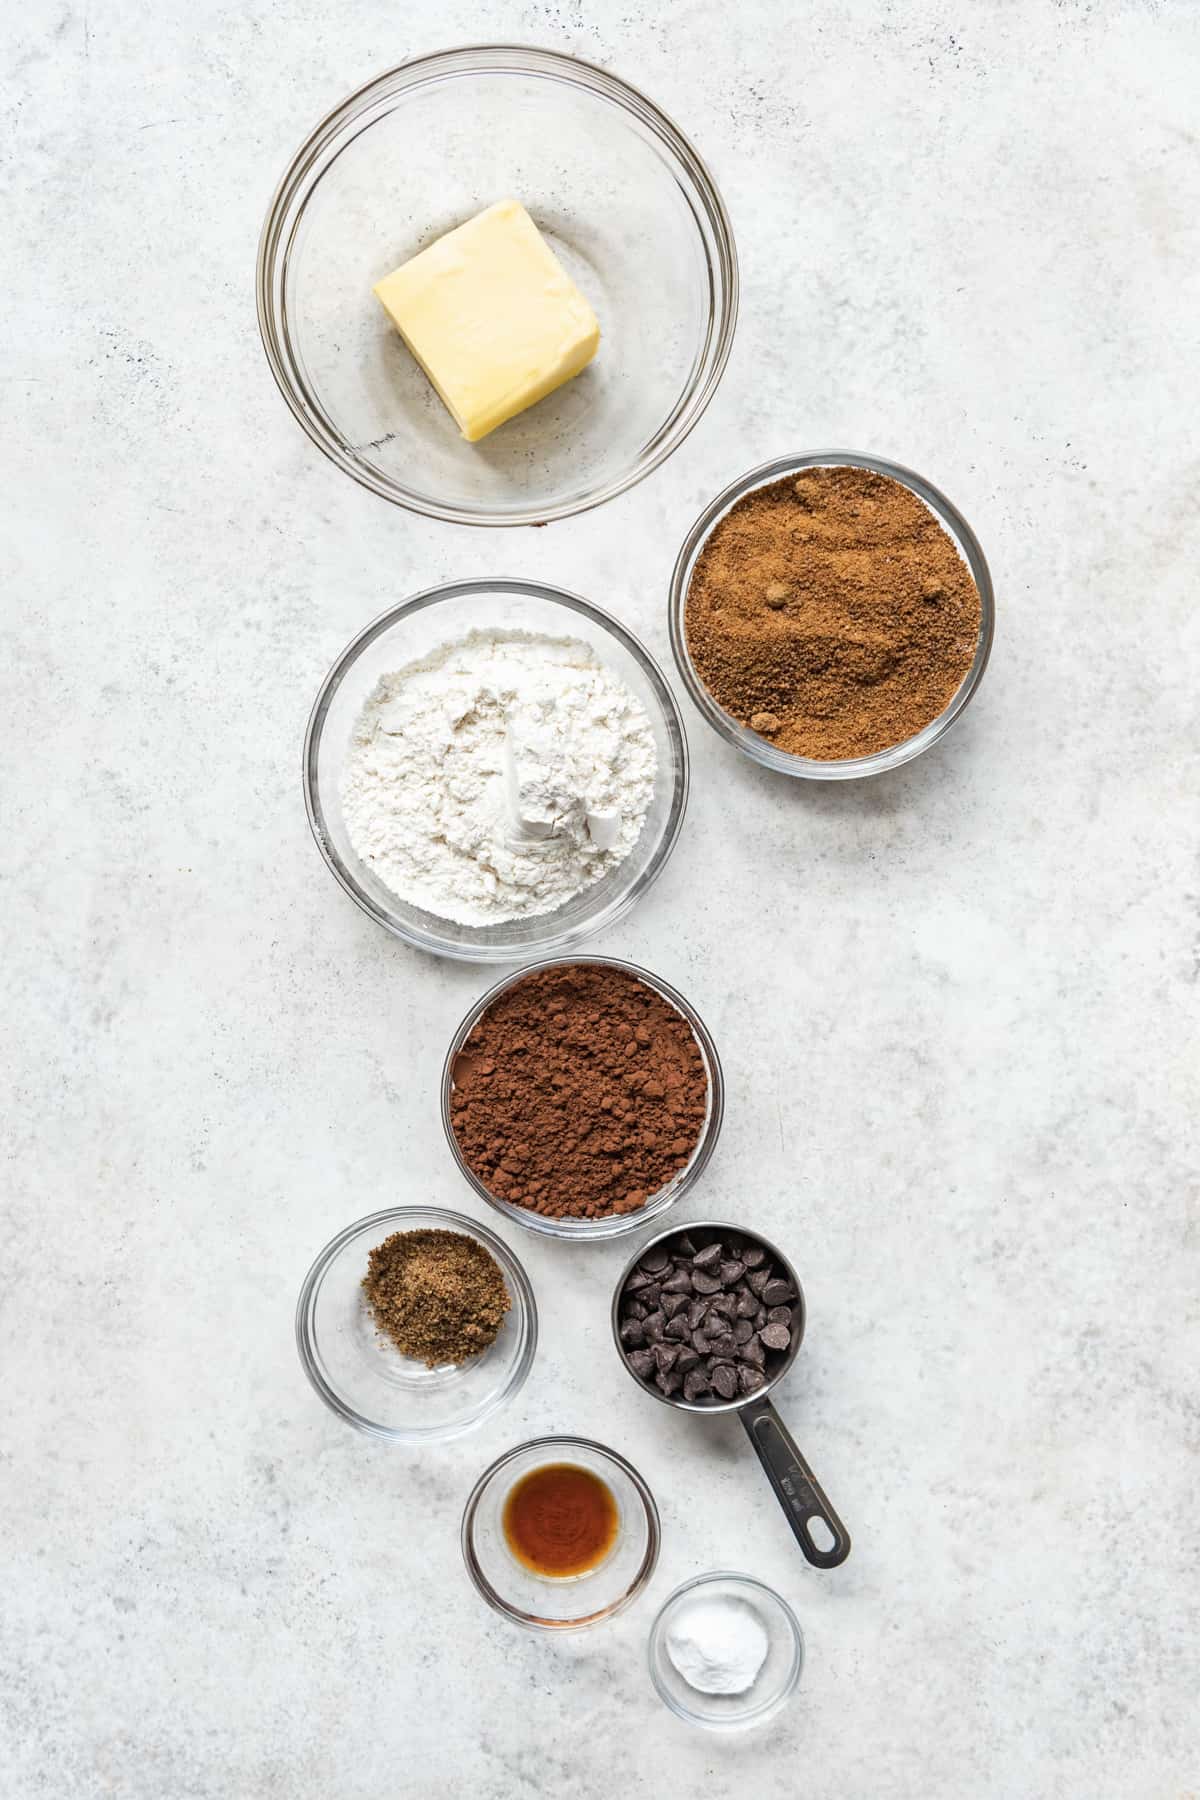 Ingredients to make eggless double chocolate chip cookies on a white surface.